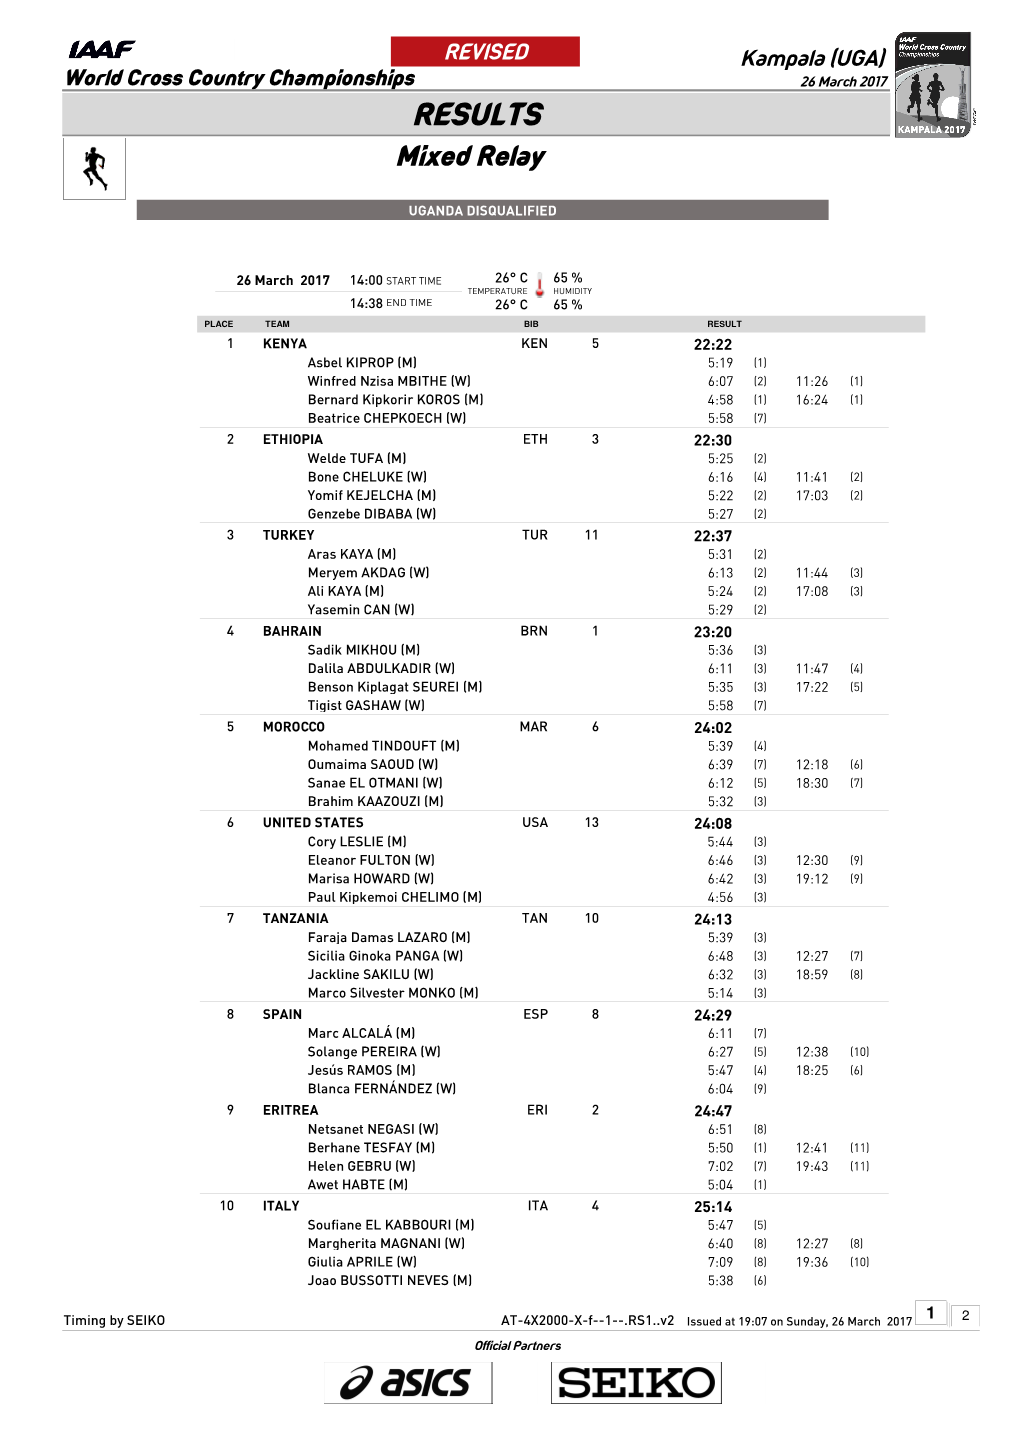 RESULTS Mixed Relay